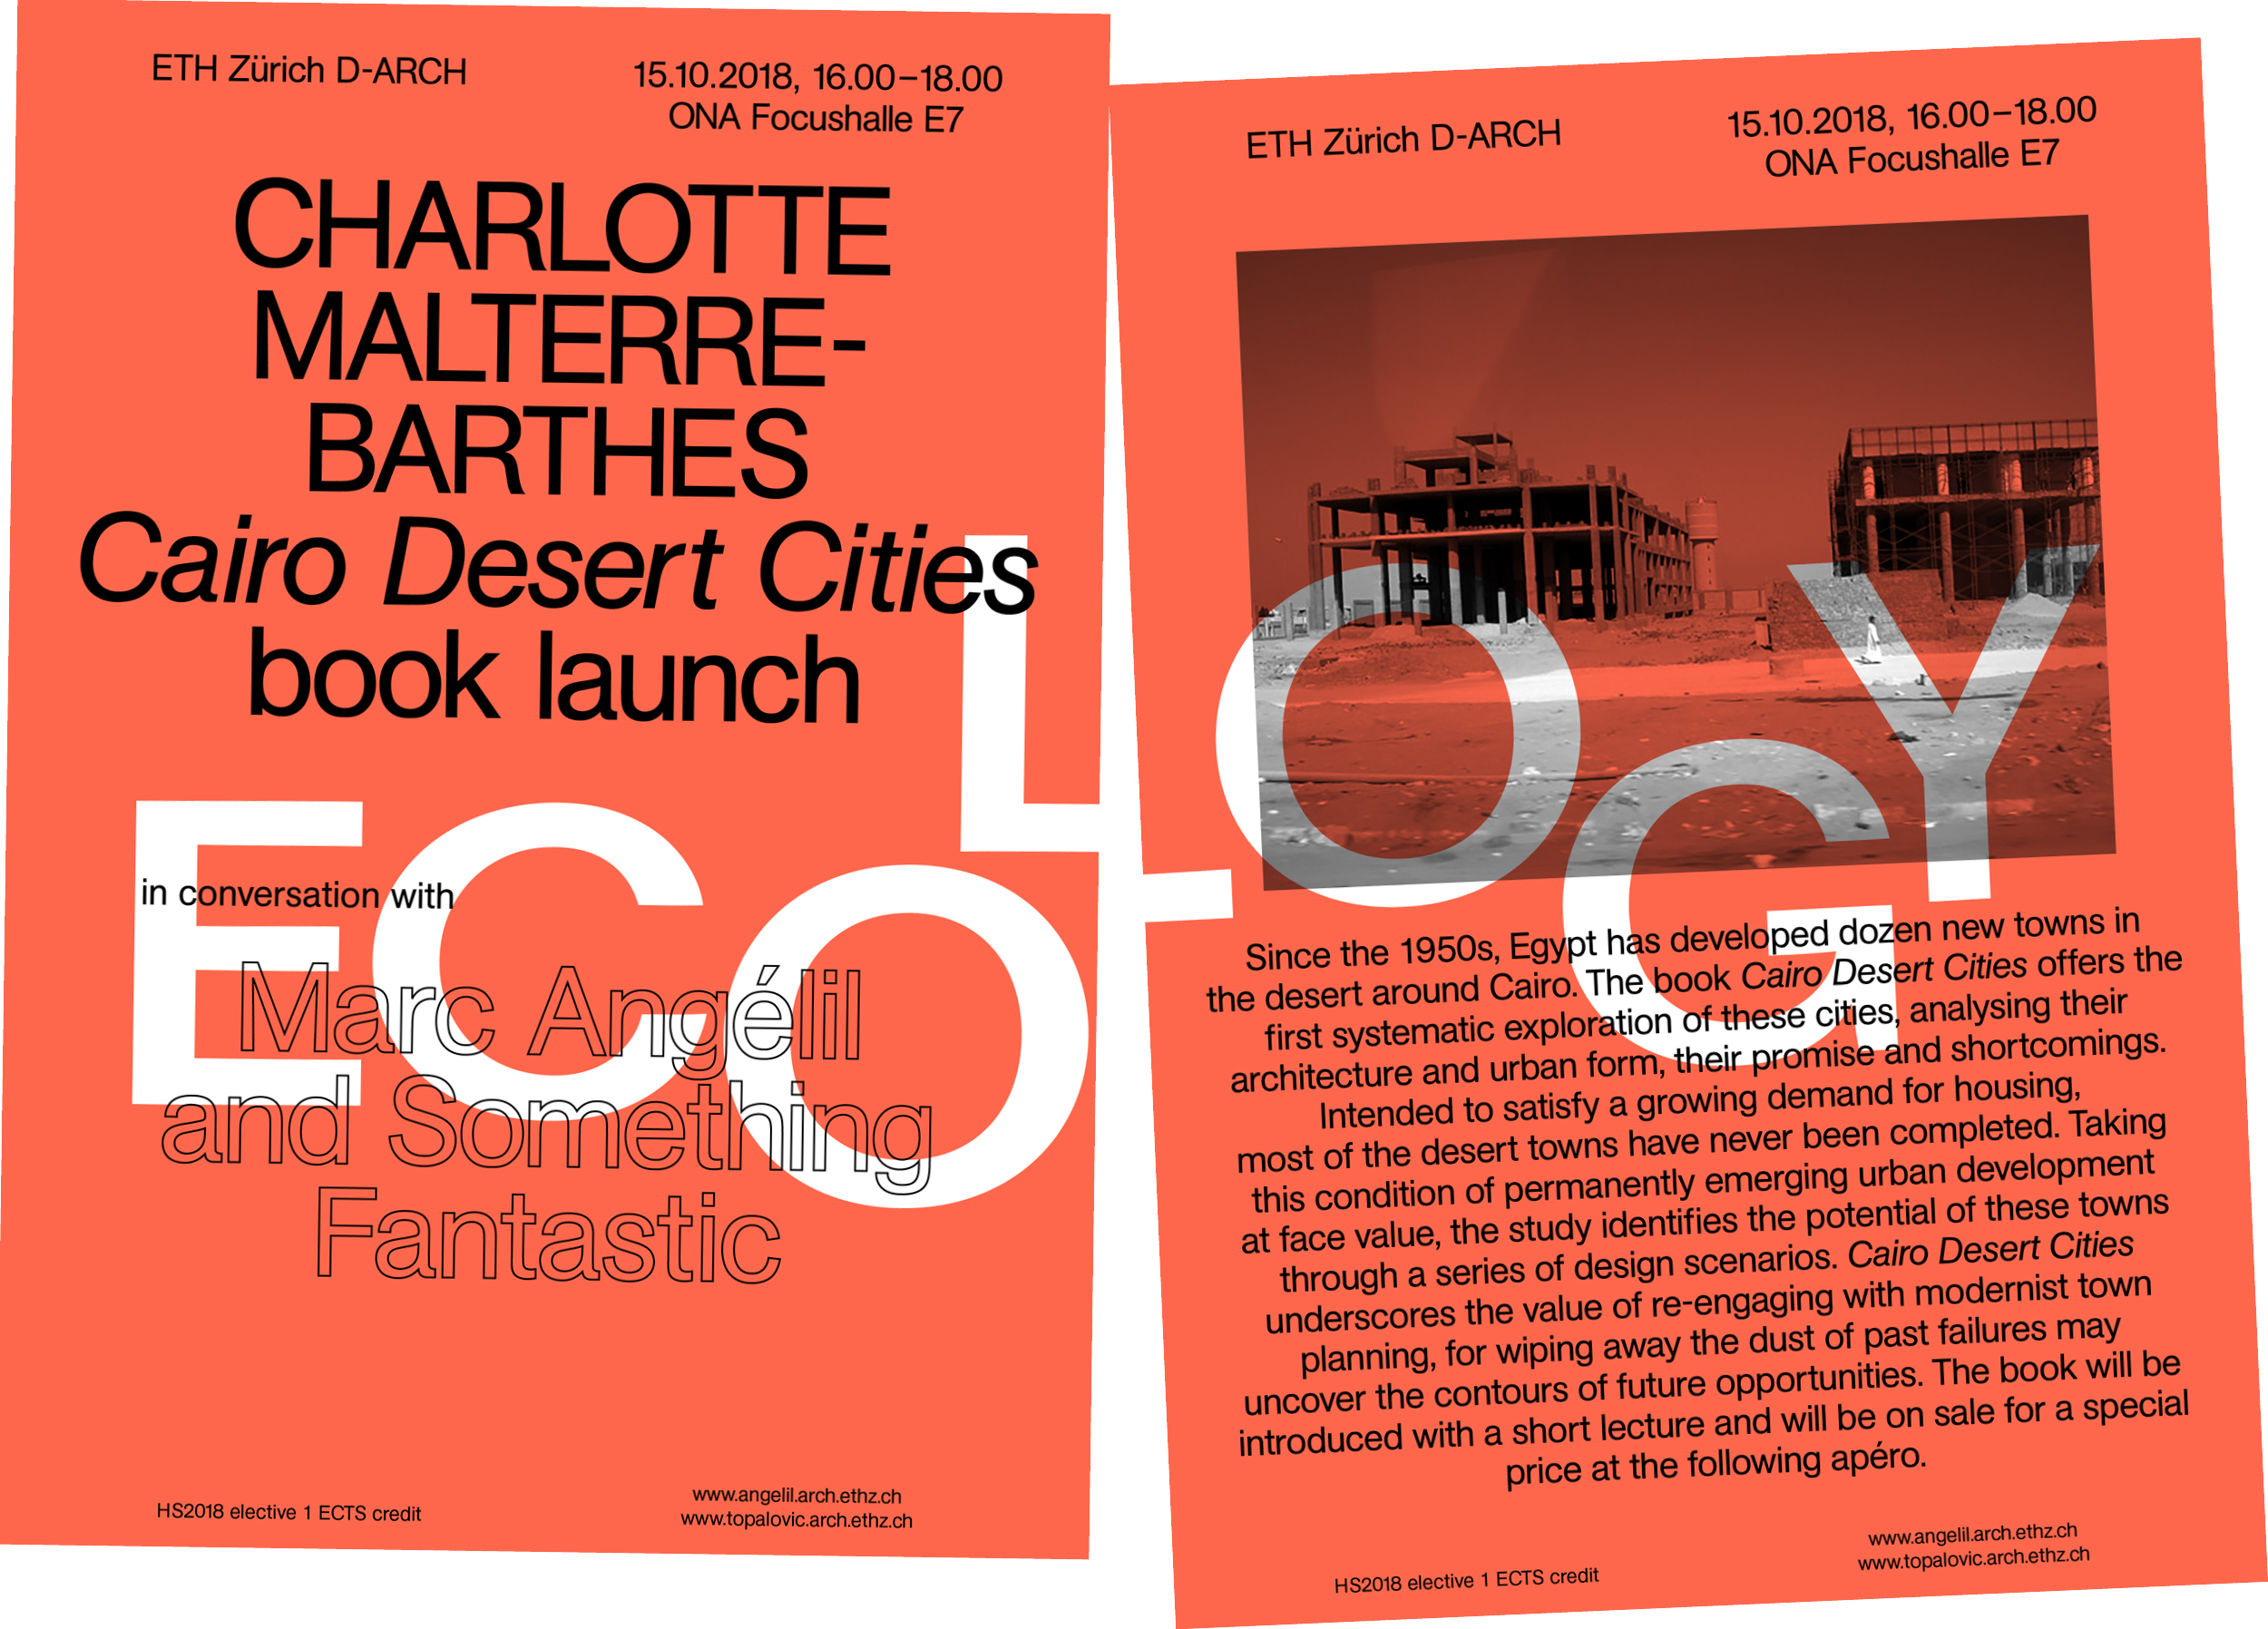 SOT HS18_LECTURE 02_Charlotte Malterre-Barthes_Flyer